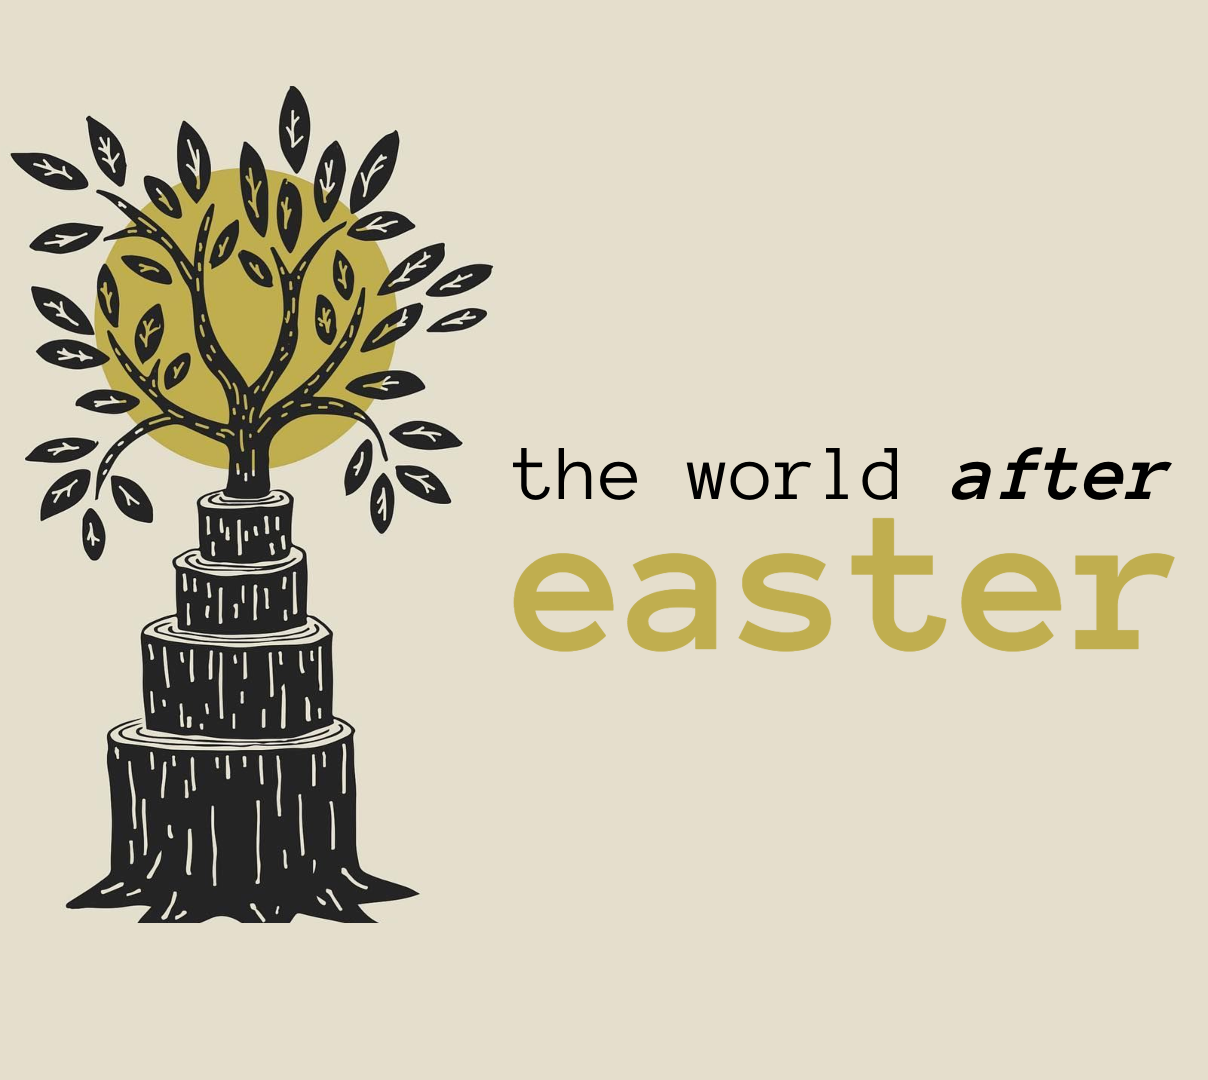 Ryan Post - "The World After Easter"